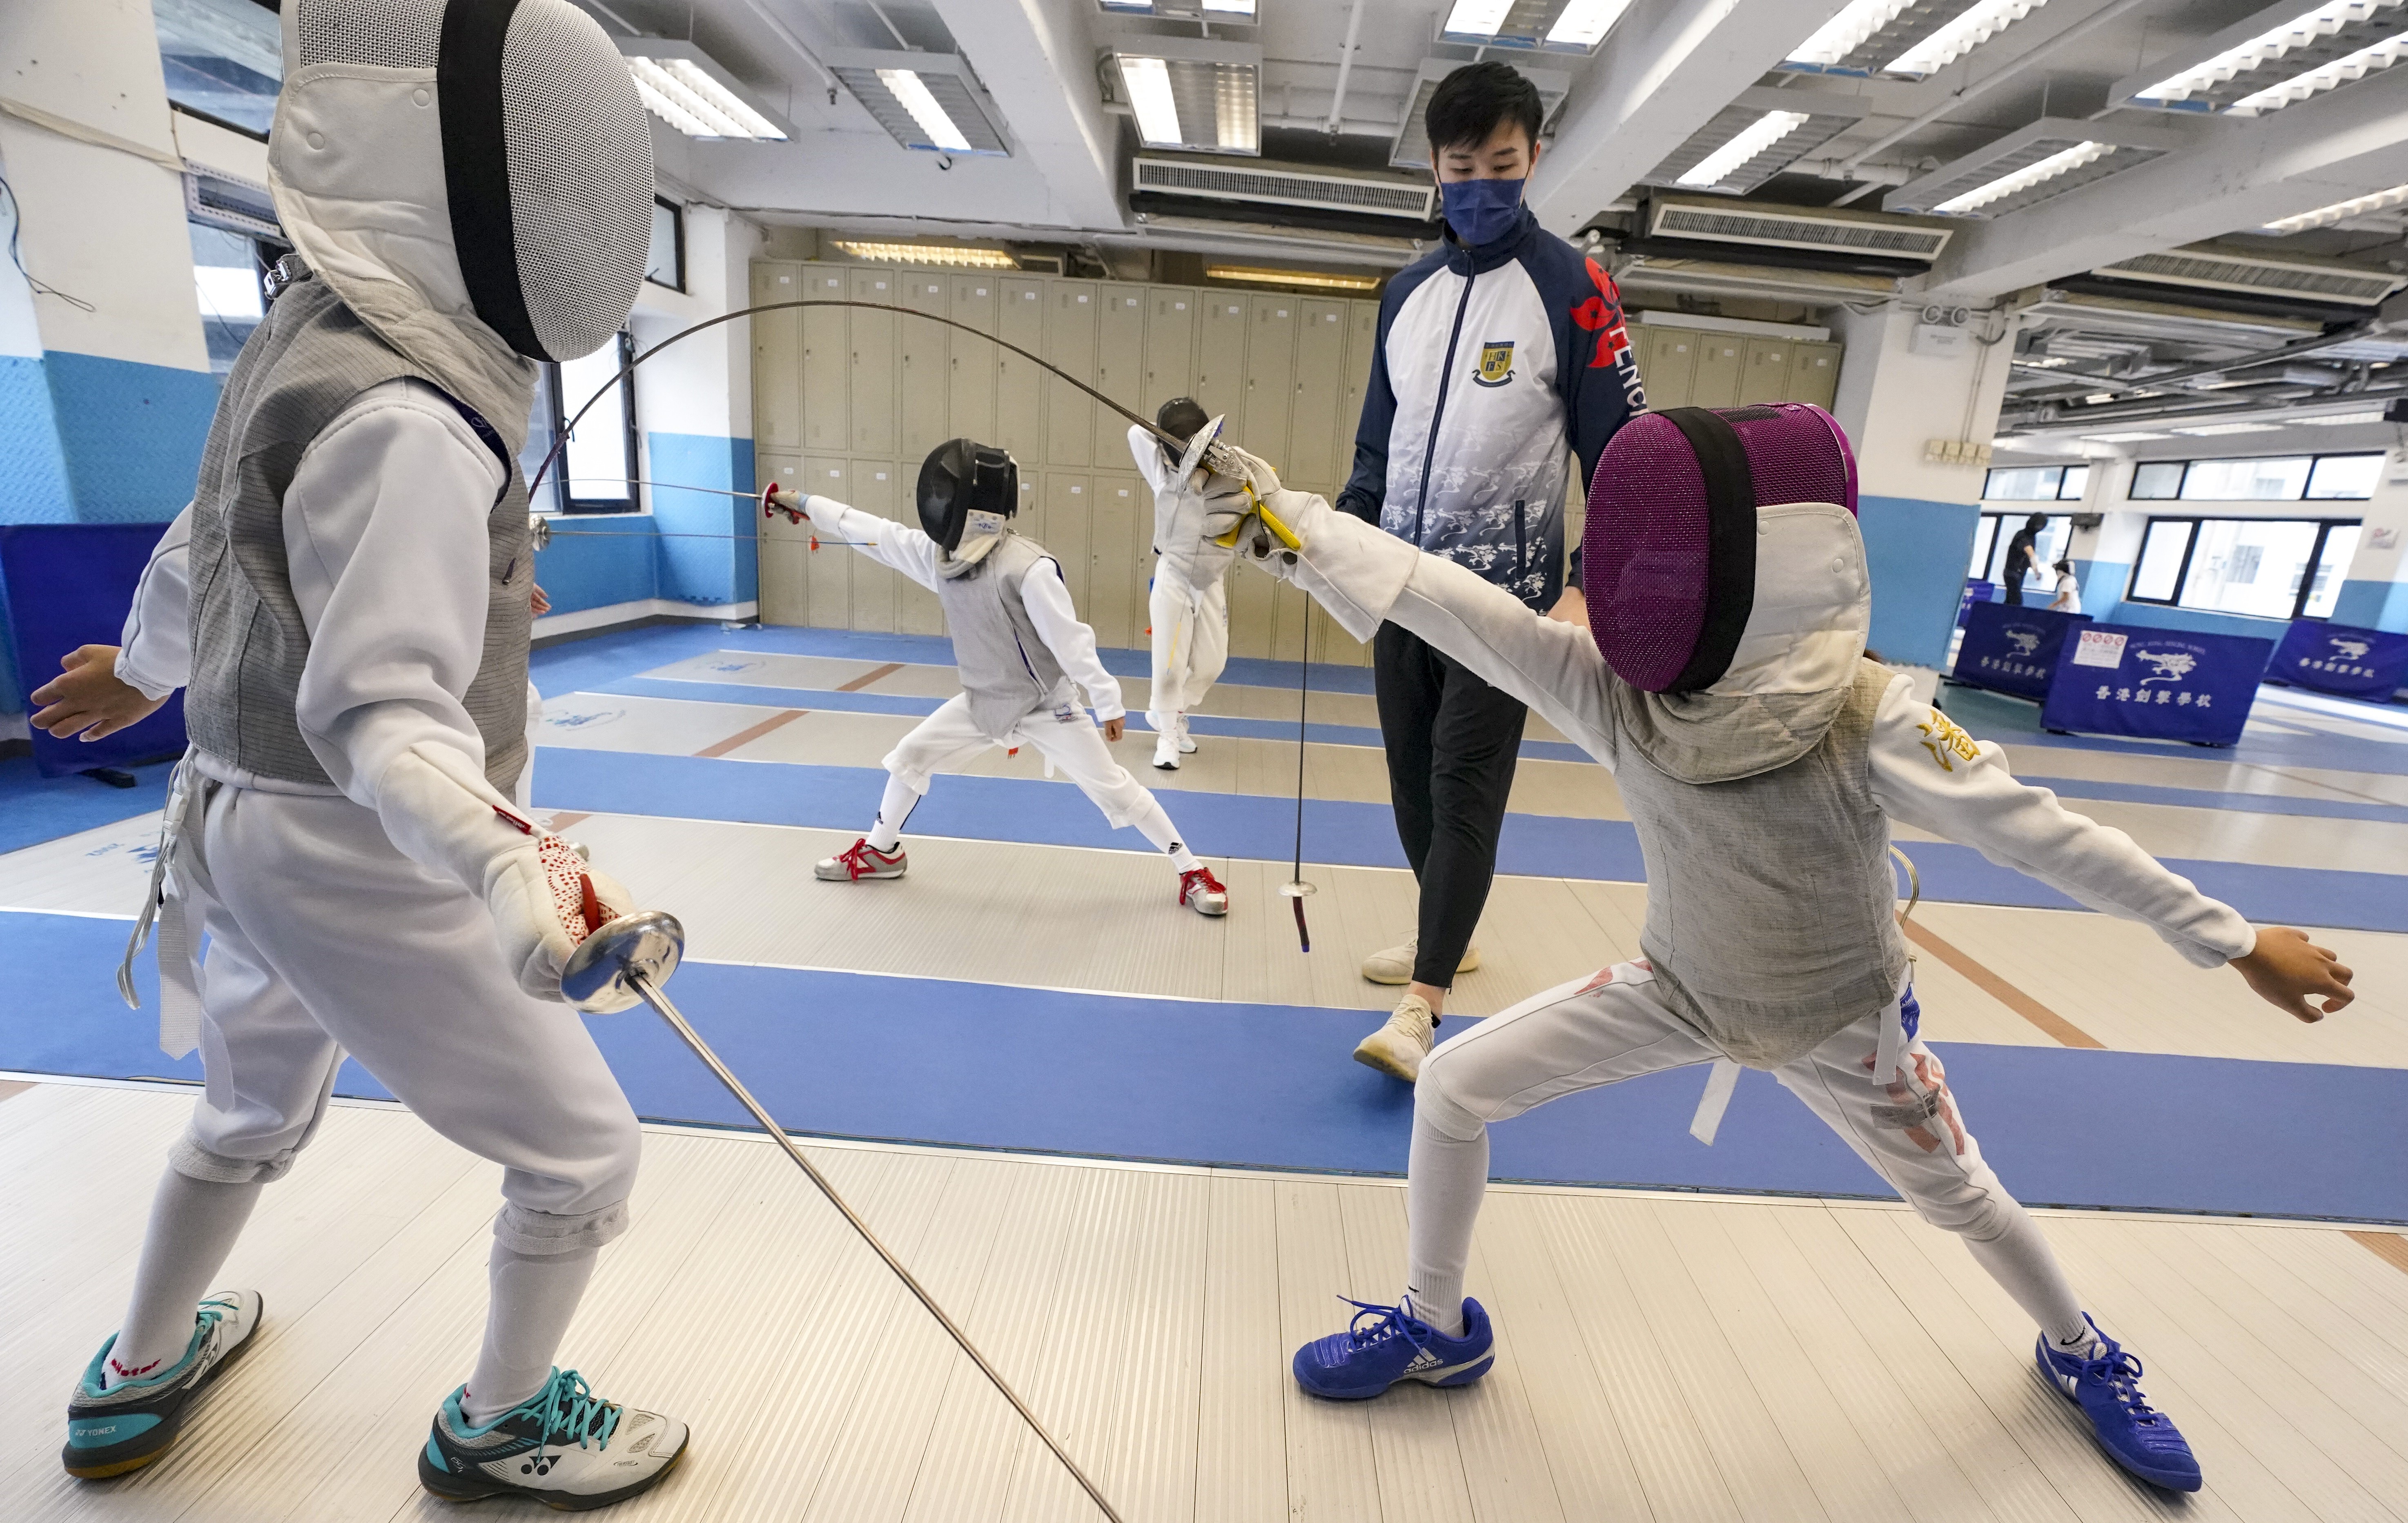 Phones have been very busy at Hong Kong’s fencing schools since Edgar Cheung’s gold medal performance. Photo: Felix Wong